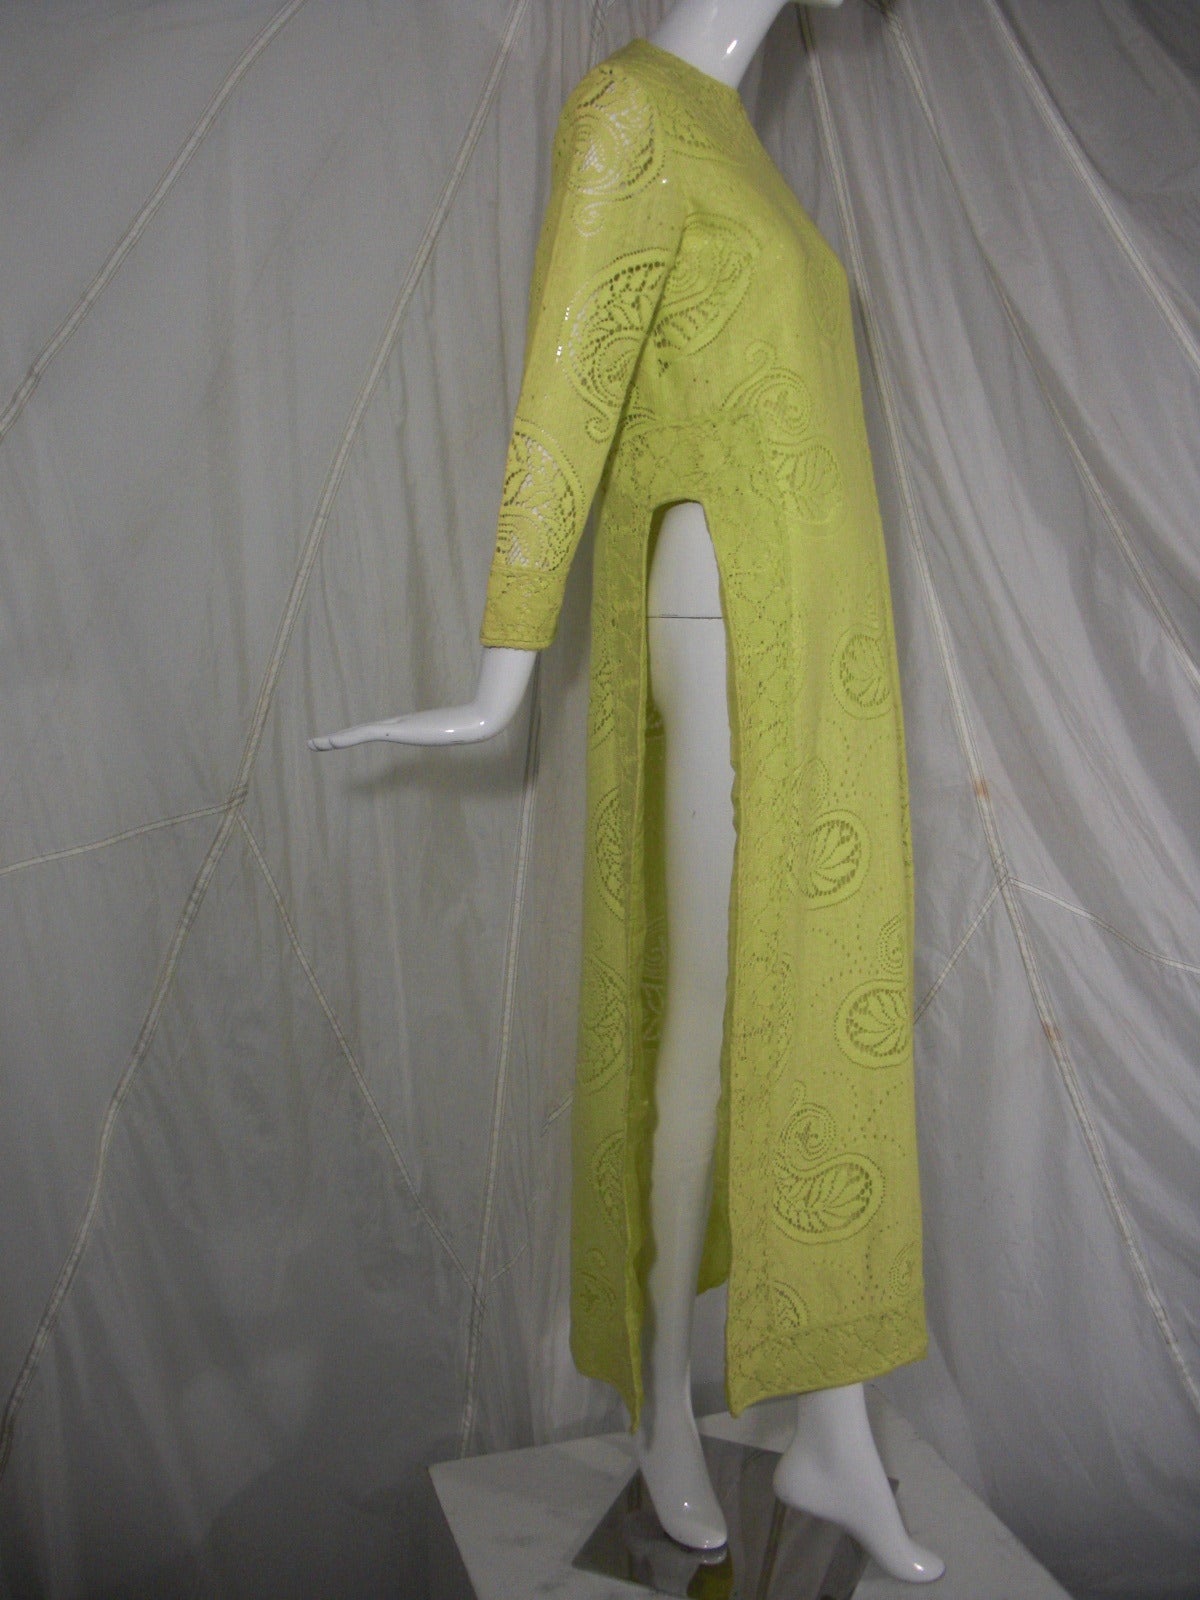 1960s Rebecca Chartreuse Tunic in Paisley Lace

Beautiful and Simply Tailored

High Side Slits 

Fabric of Import Cotton Lace